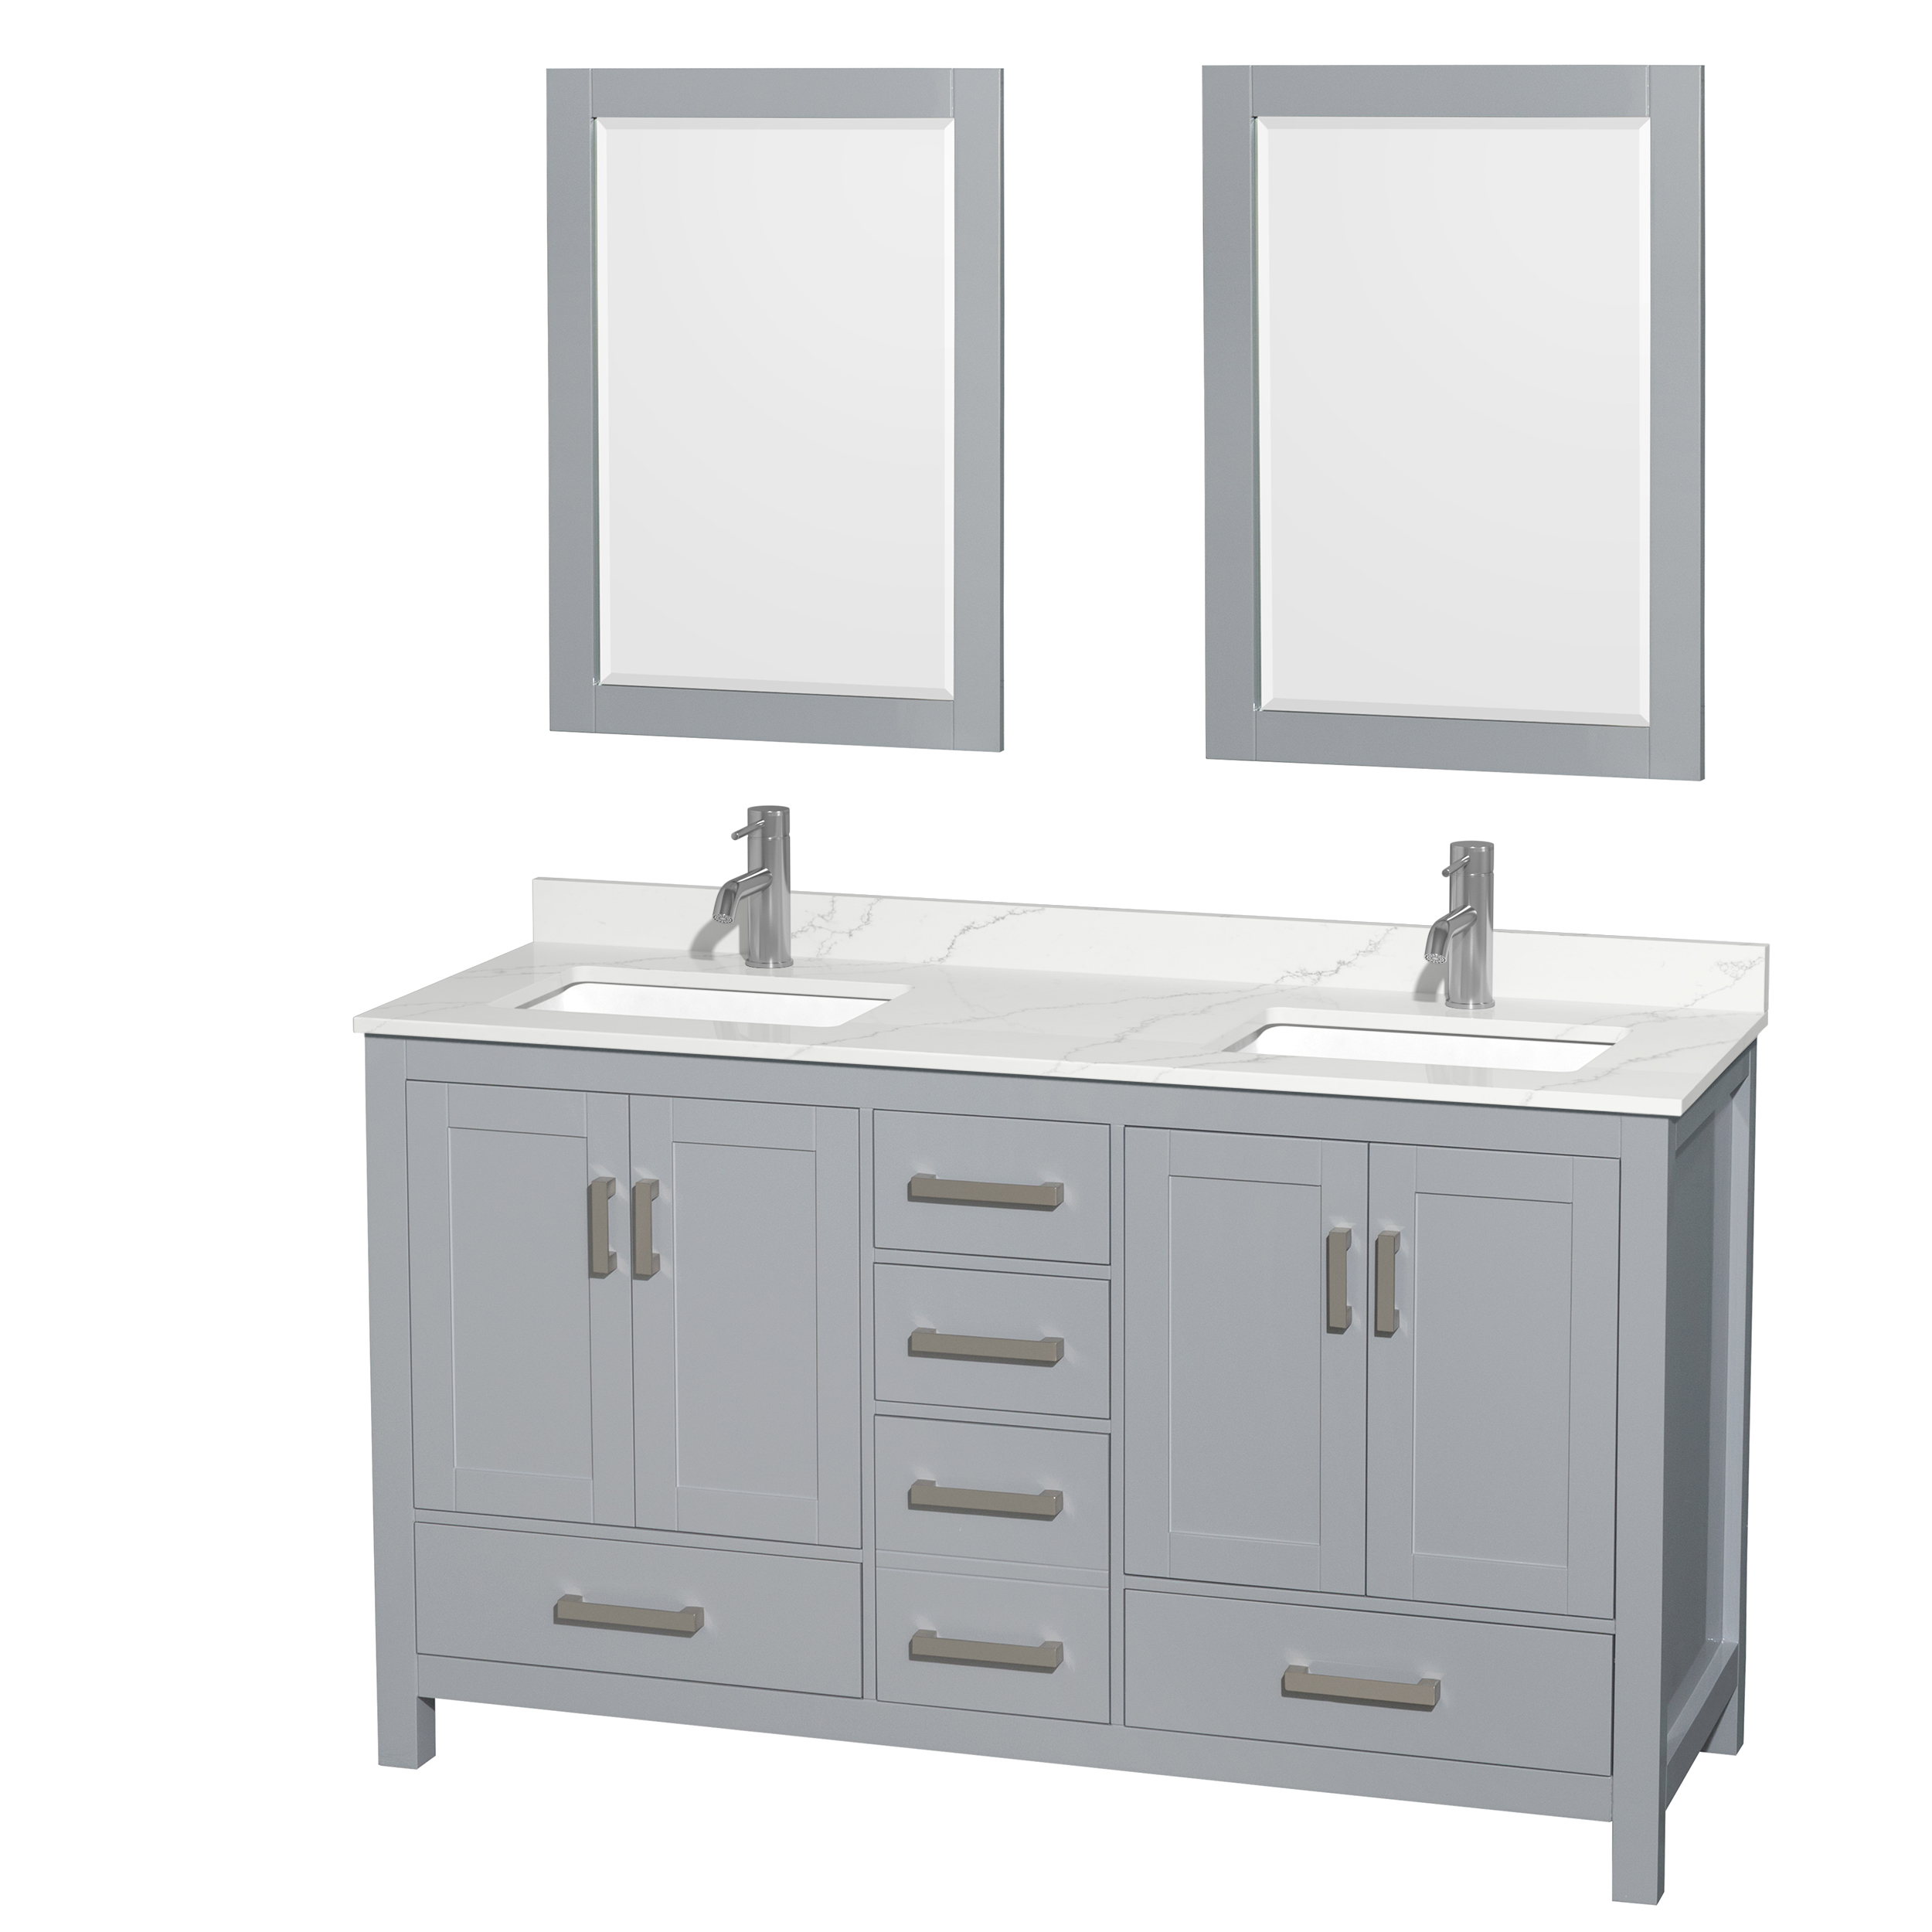 sheffield 60" double bathroom vanity by wyndham collection - gray